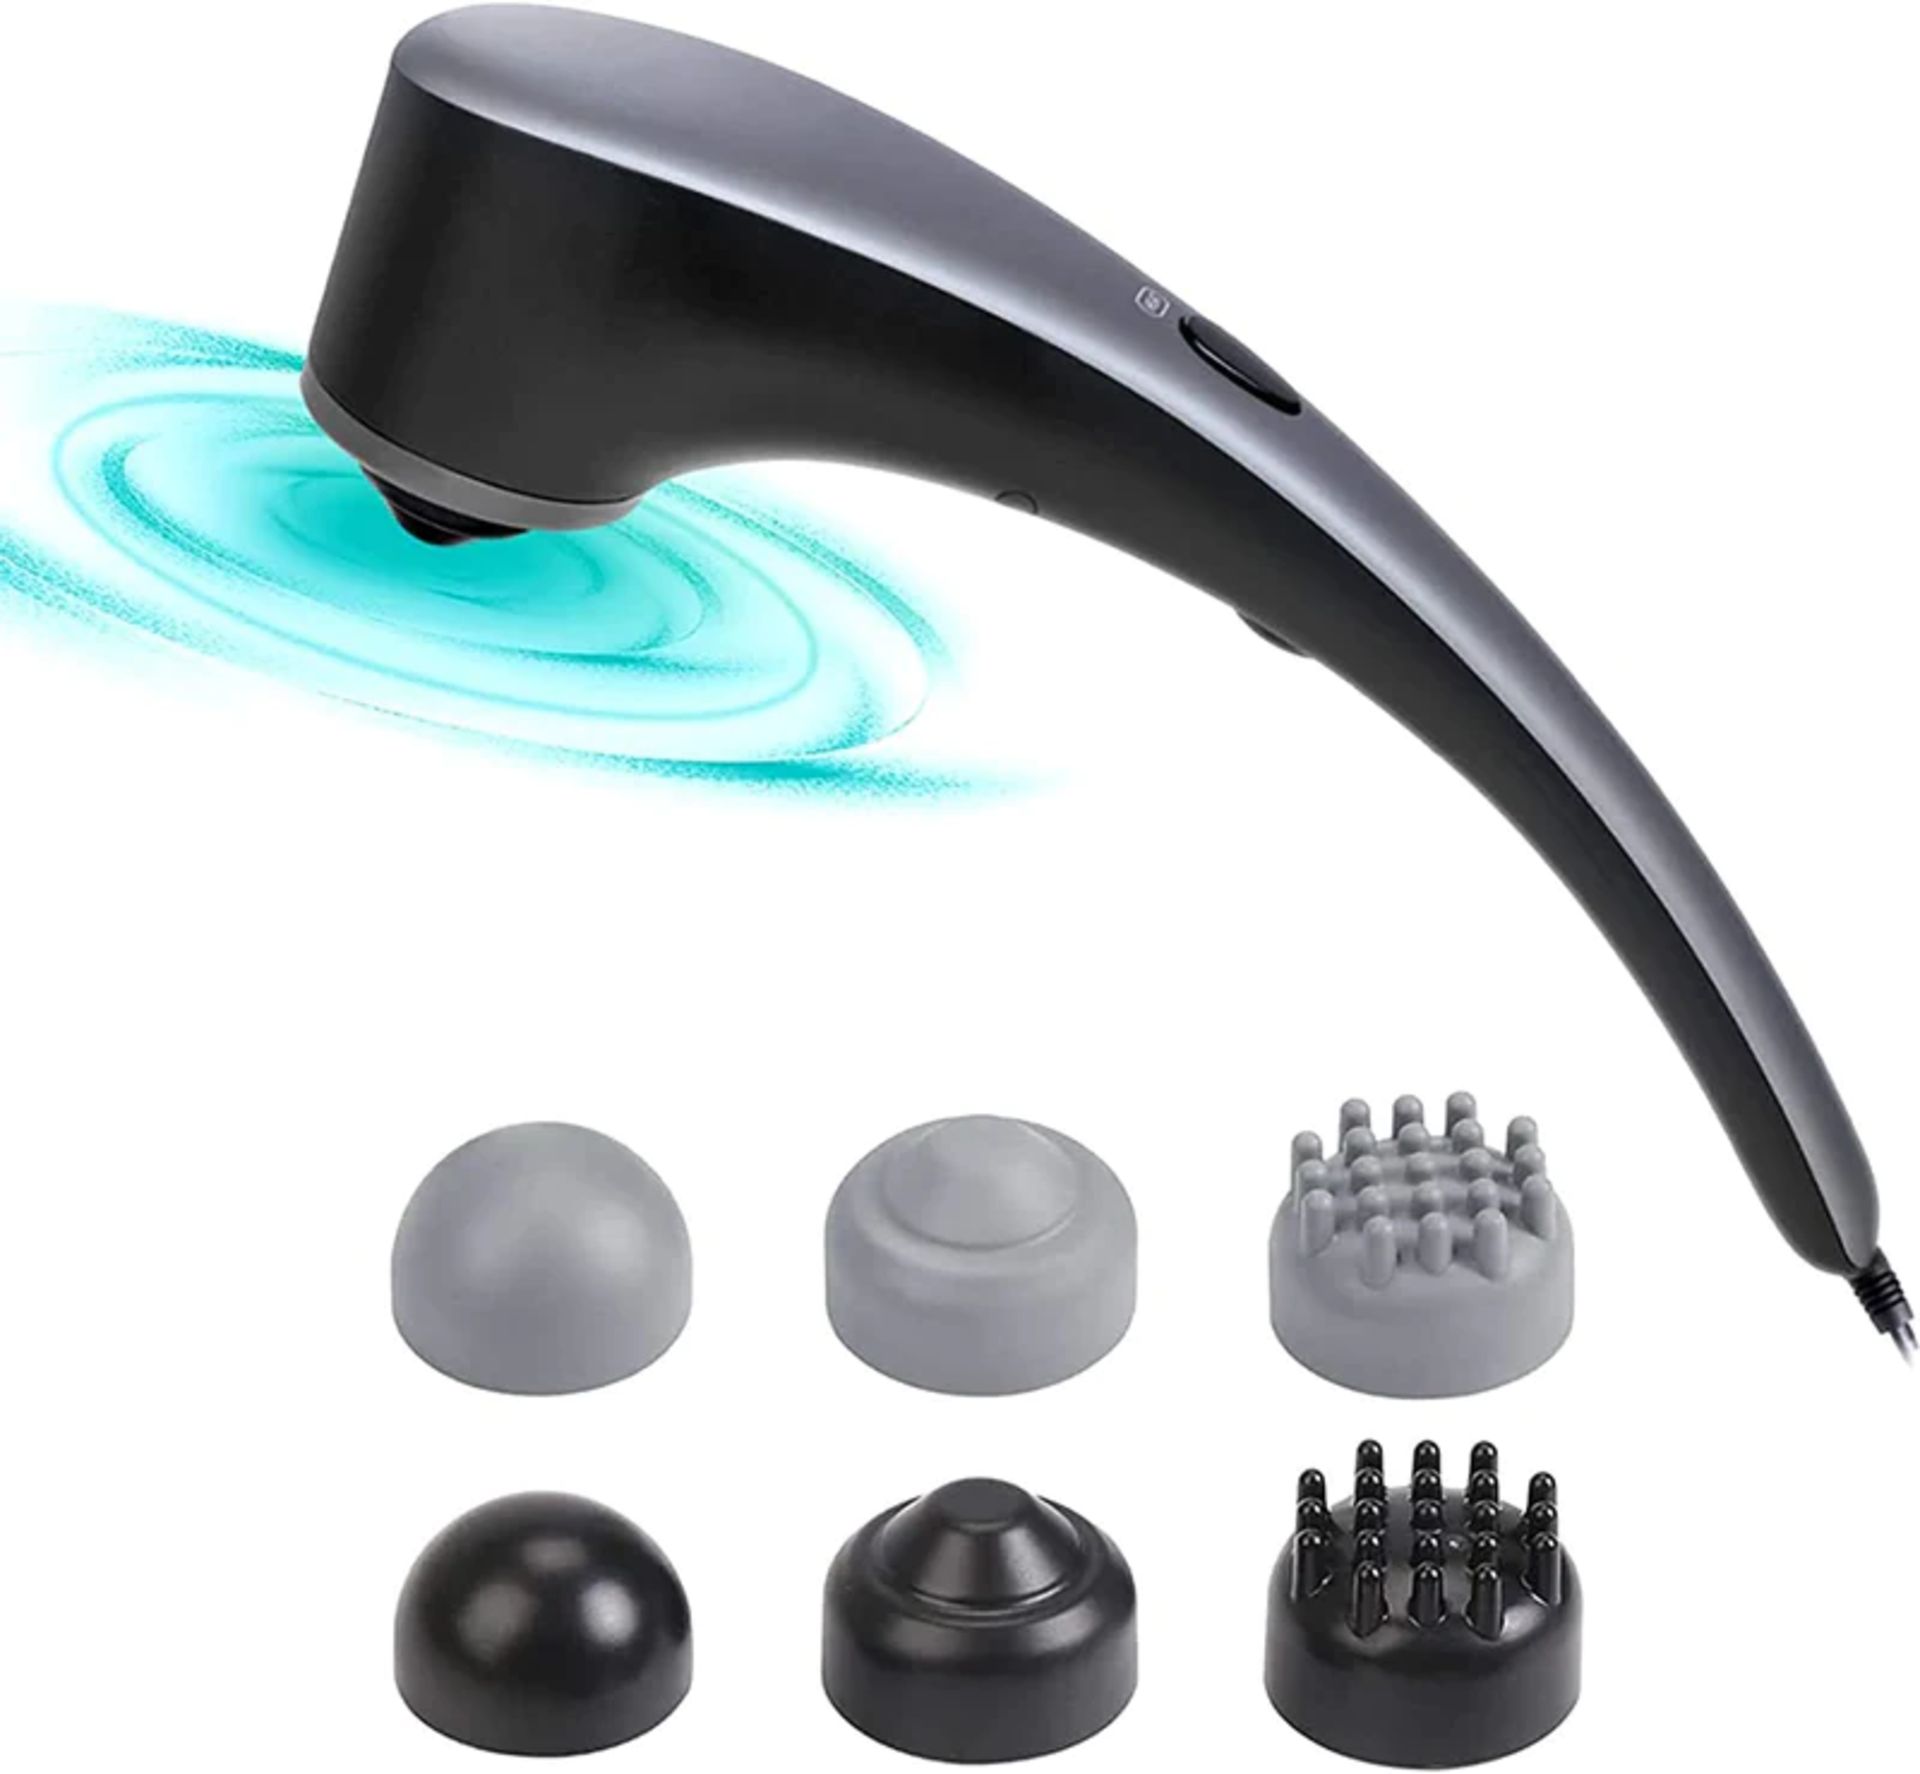 NAIPO Handheld Percussion Massager with Heating 6 Interchangeable Massage Nodes Stepless Speed